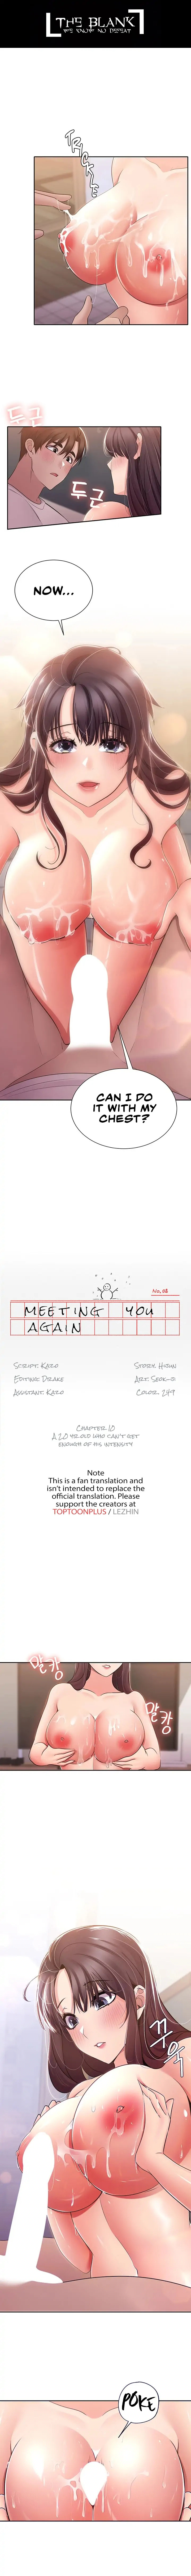 Meeting you again - Chapter 10 Page 1